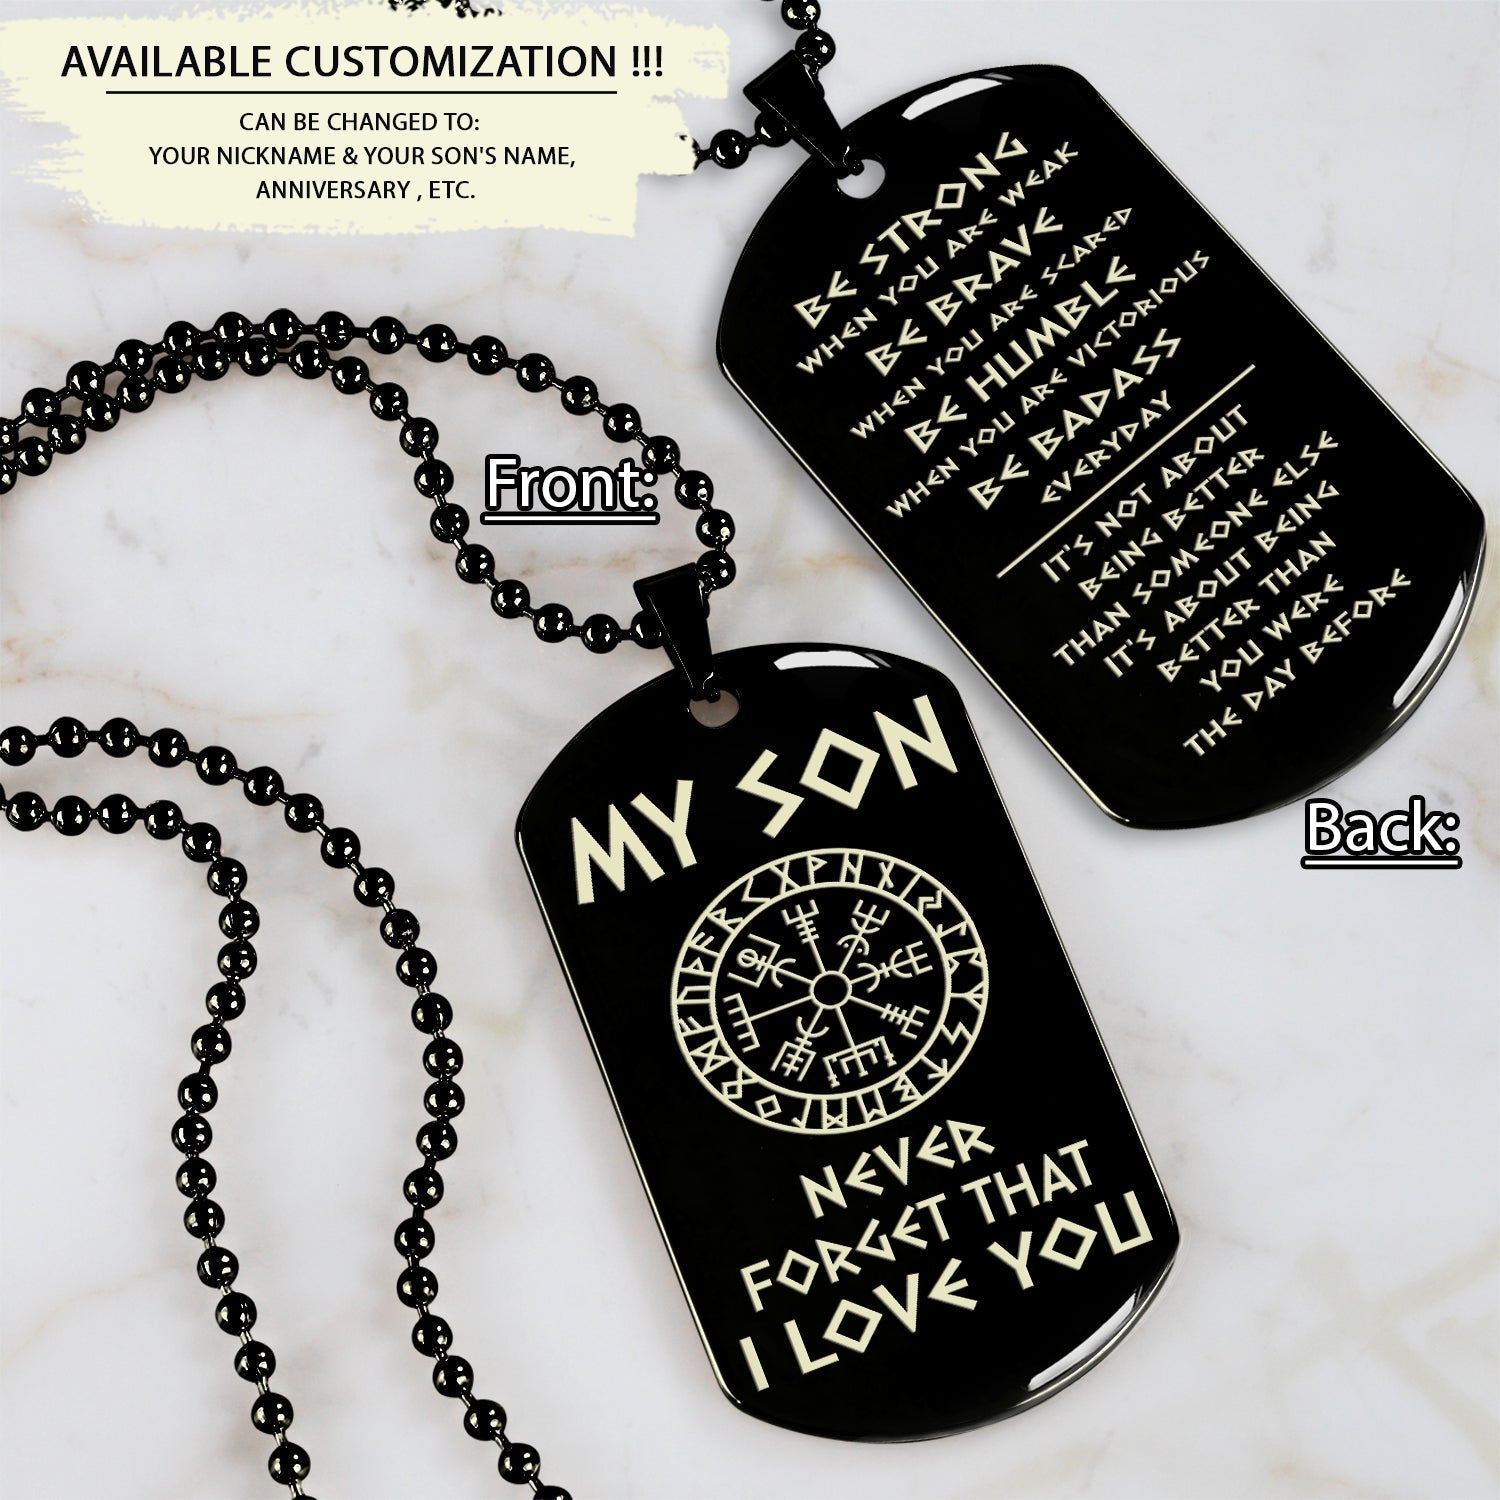 Viking engraved double sided dog tag dad to son be strong when you are weak